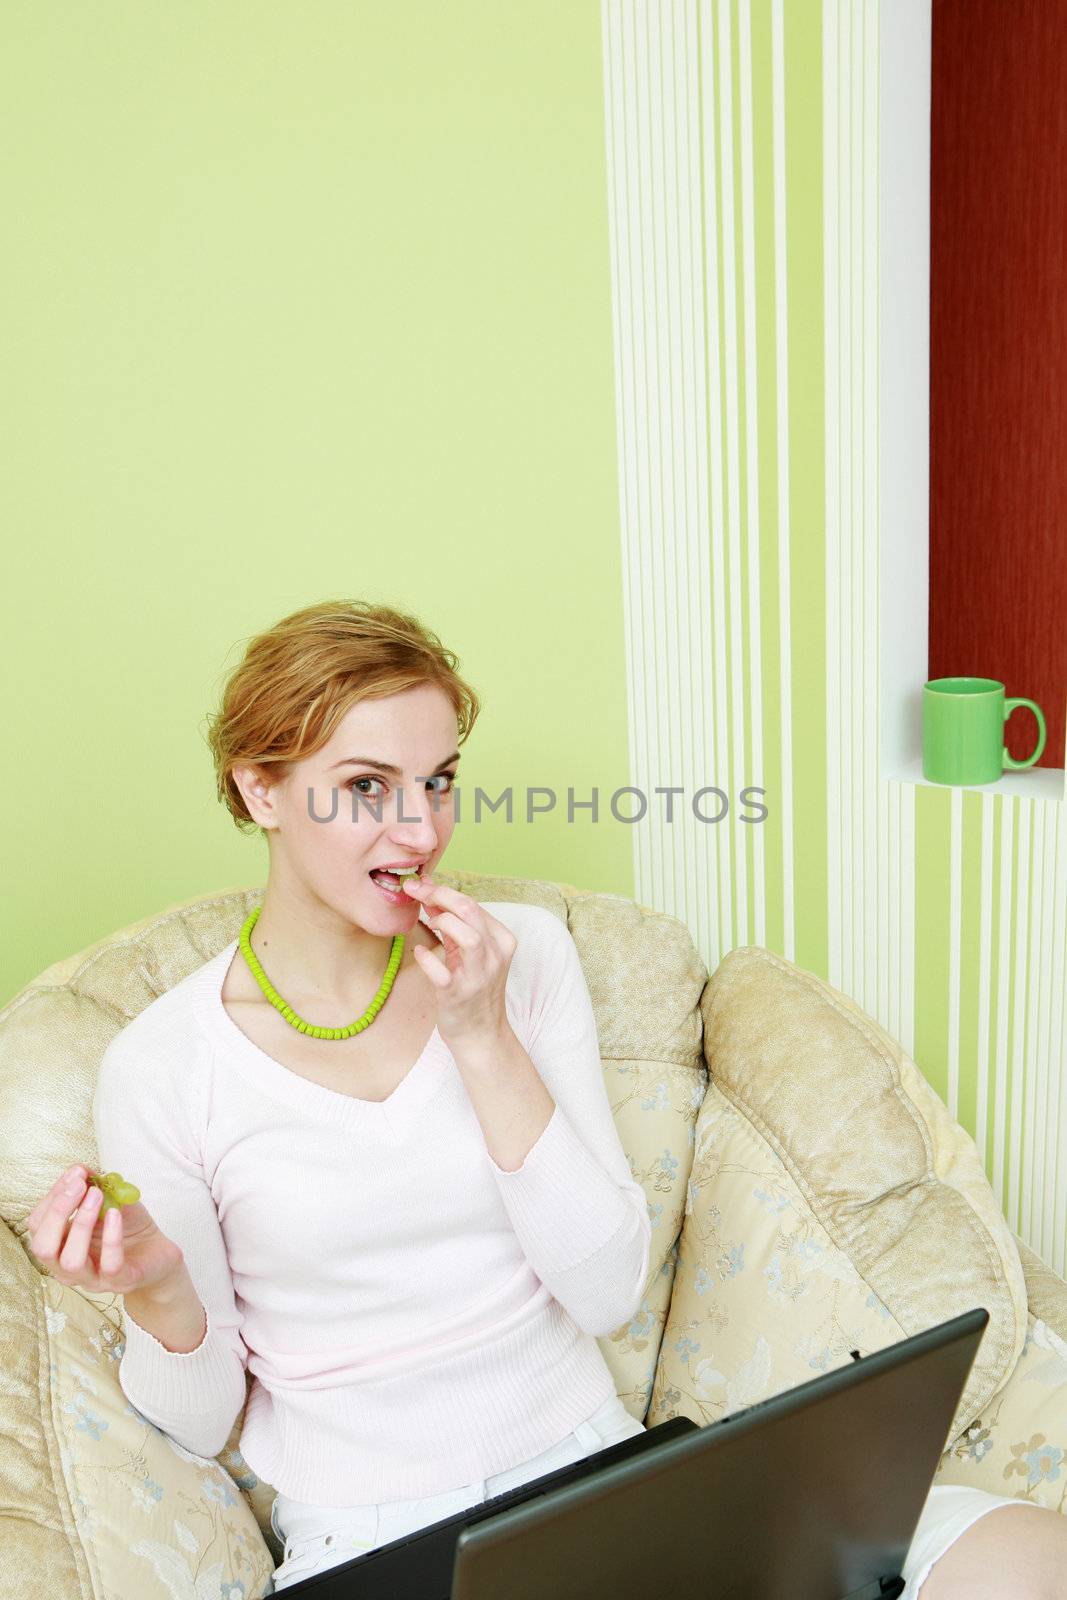 An image of a girl sitting in armchair